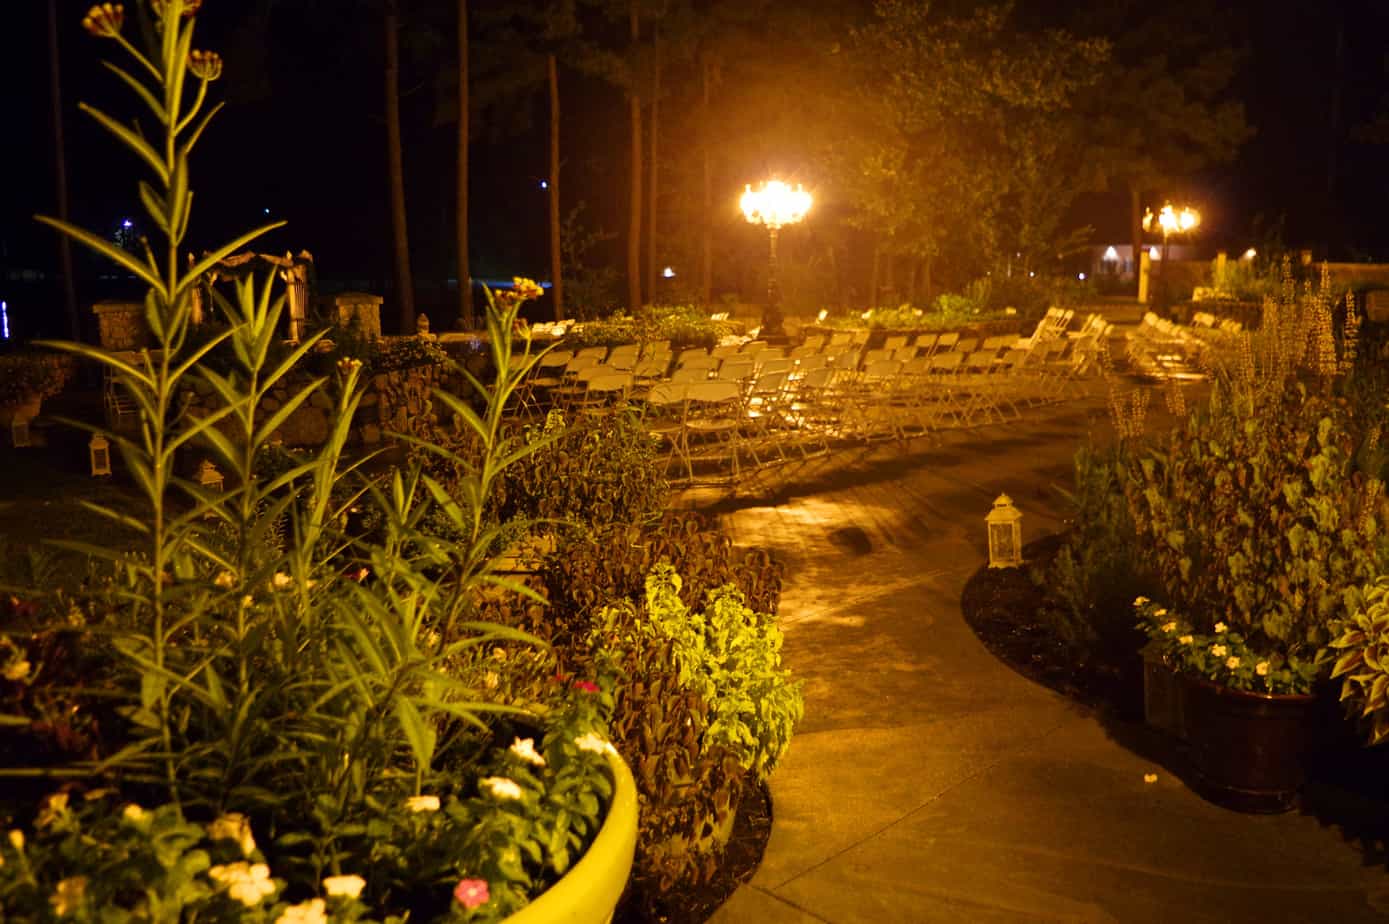 A path in the middle of a garden at night.